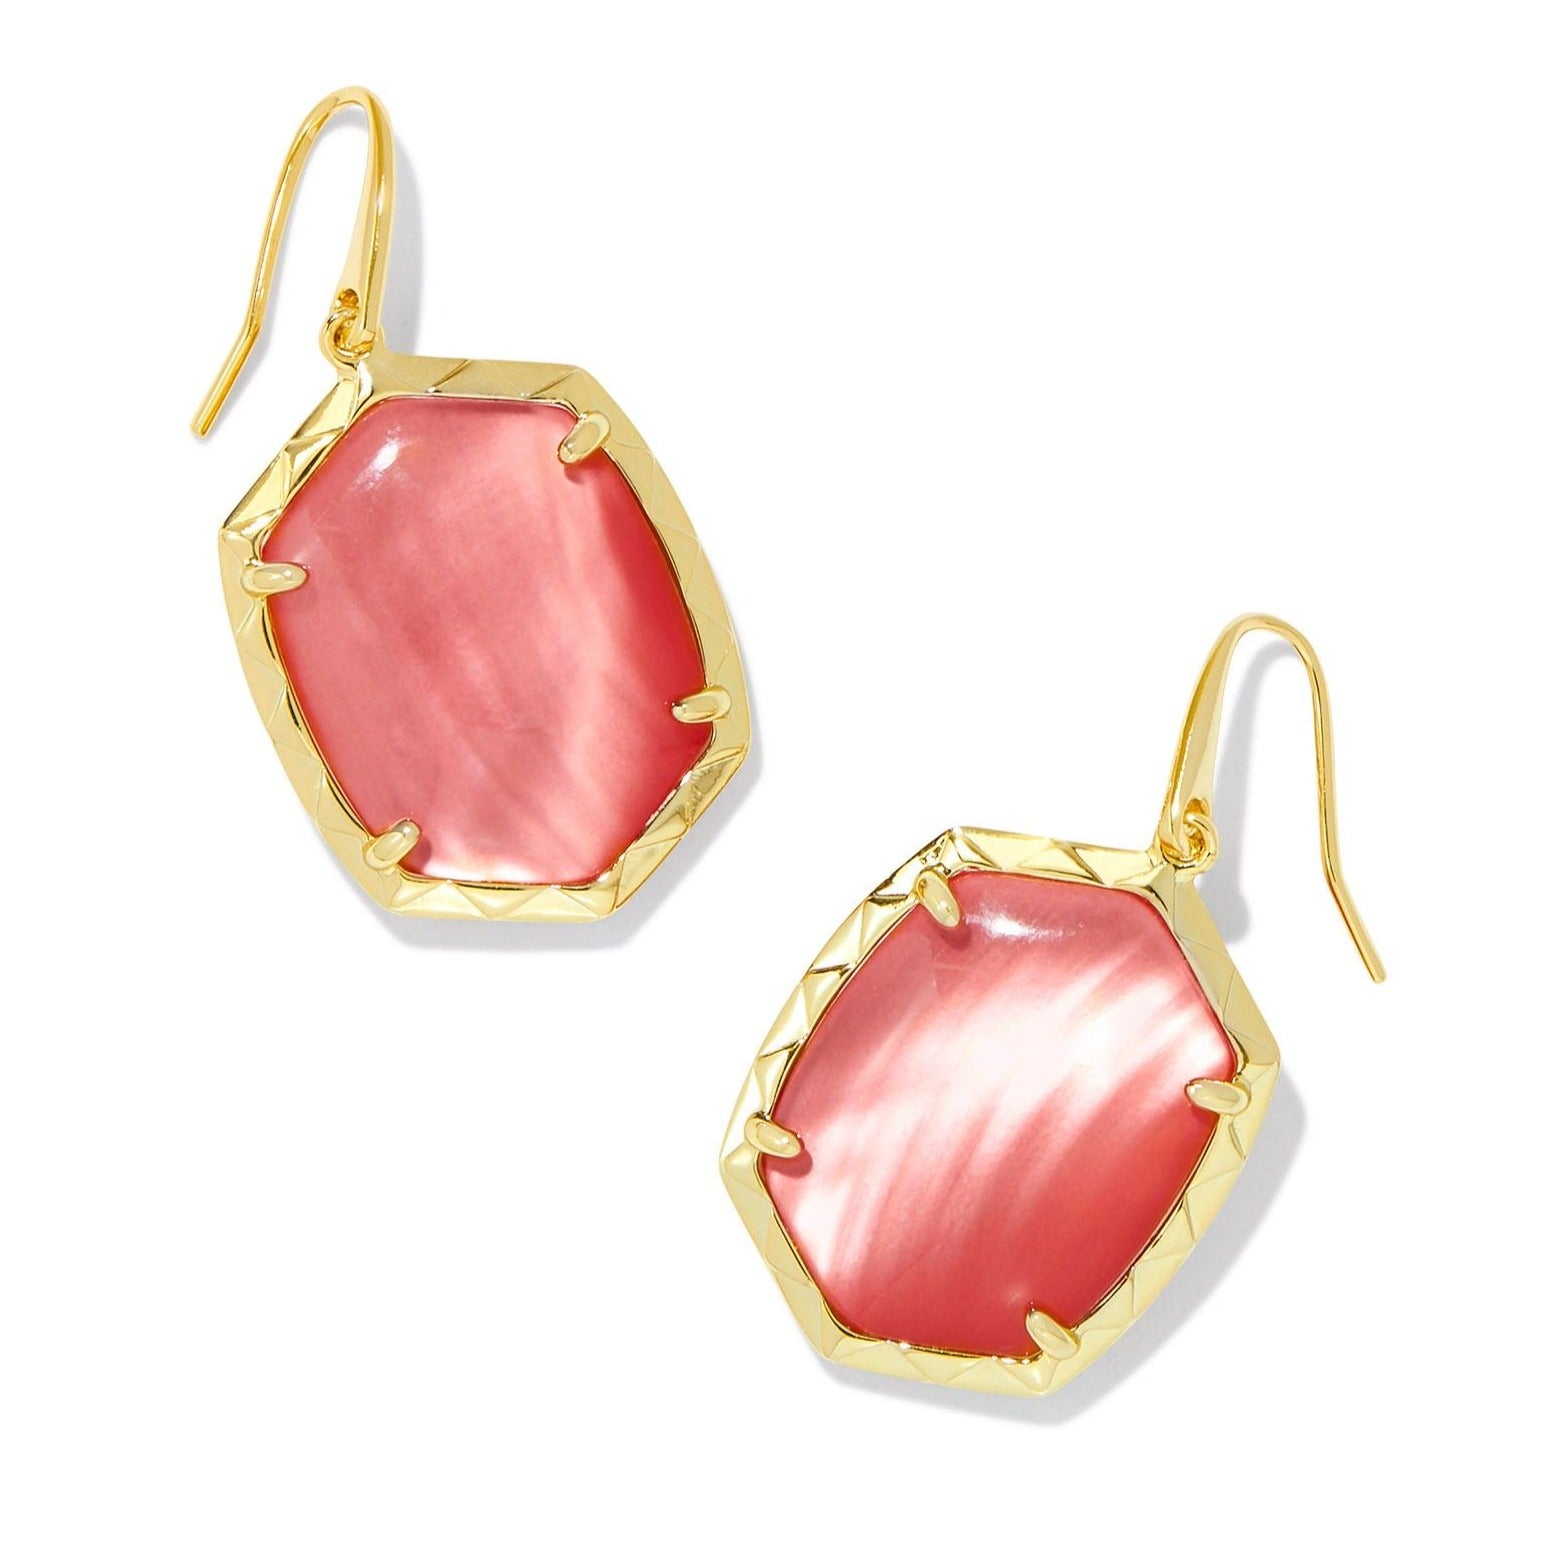 Kendra Scott | Daphne Gold Drop Earrings in Coral Pink Mother of Pearl - Giddy Up Glamour Boutique